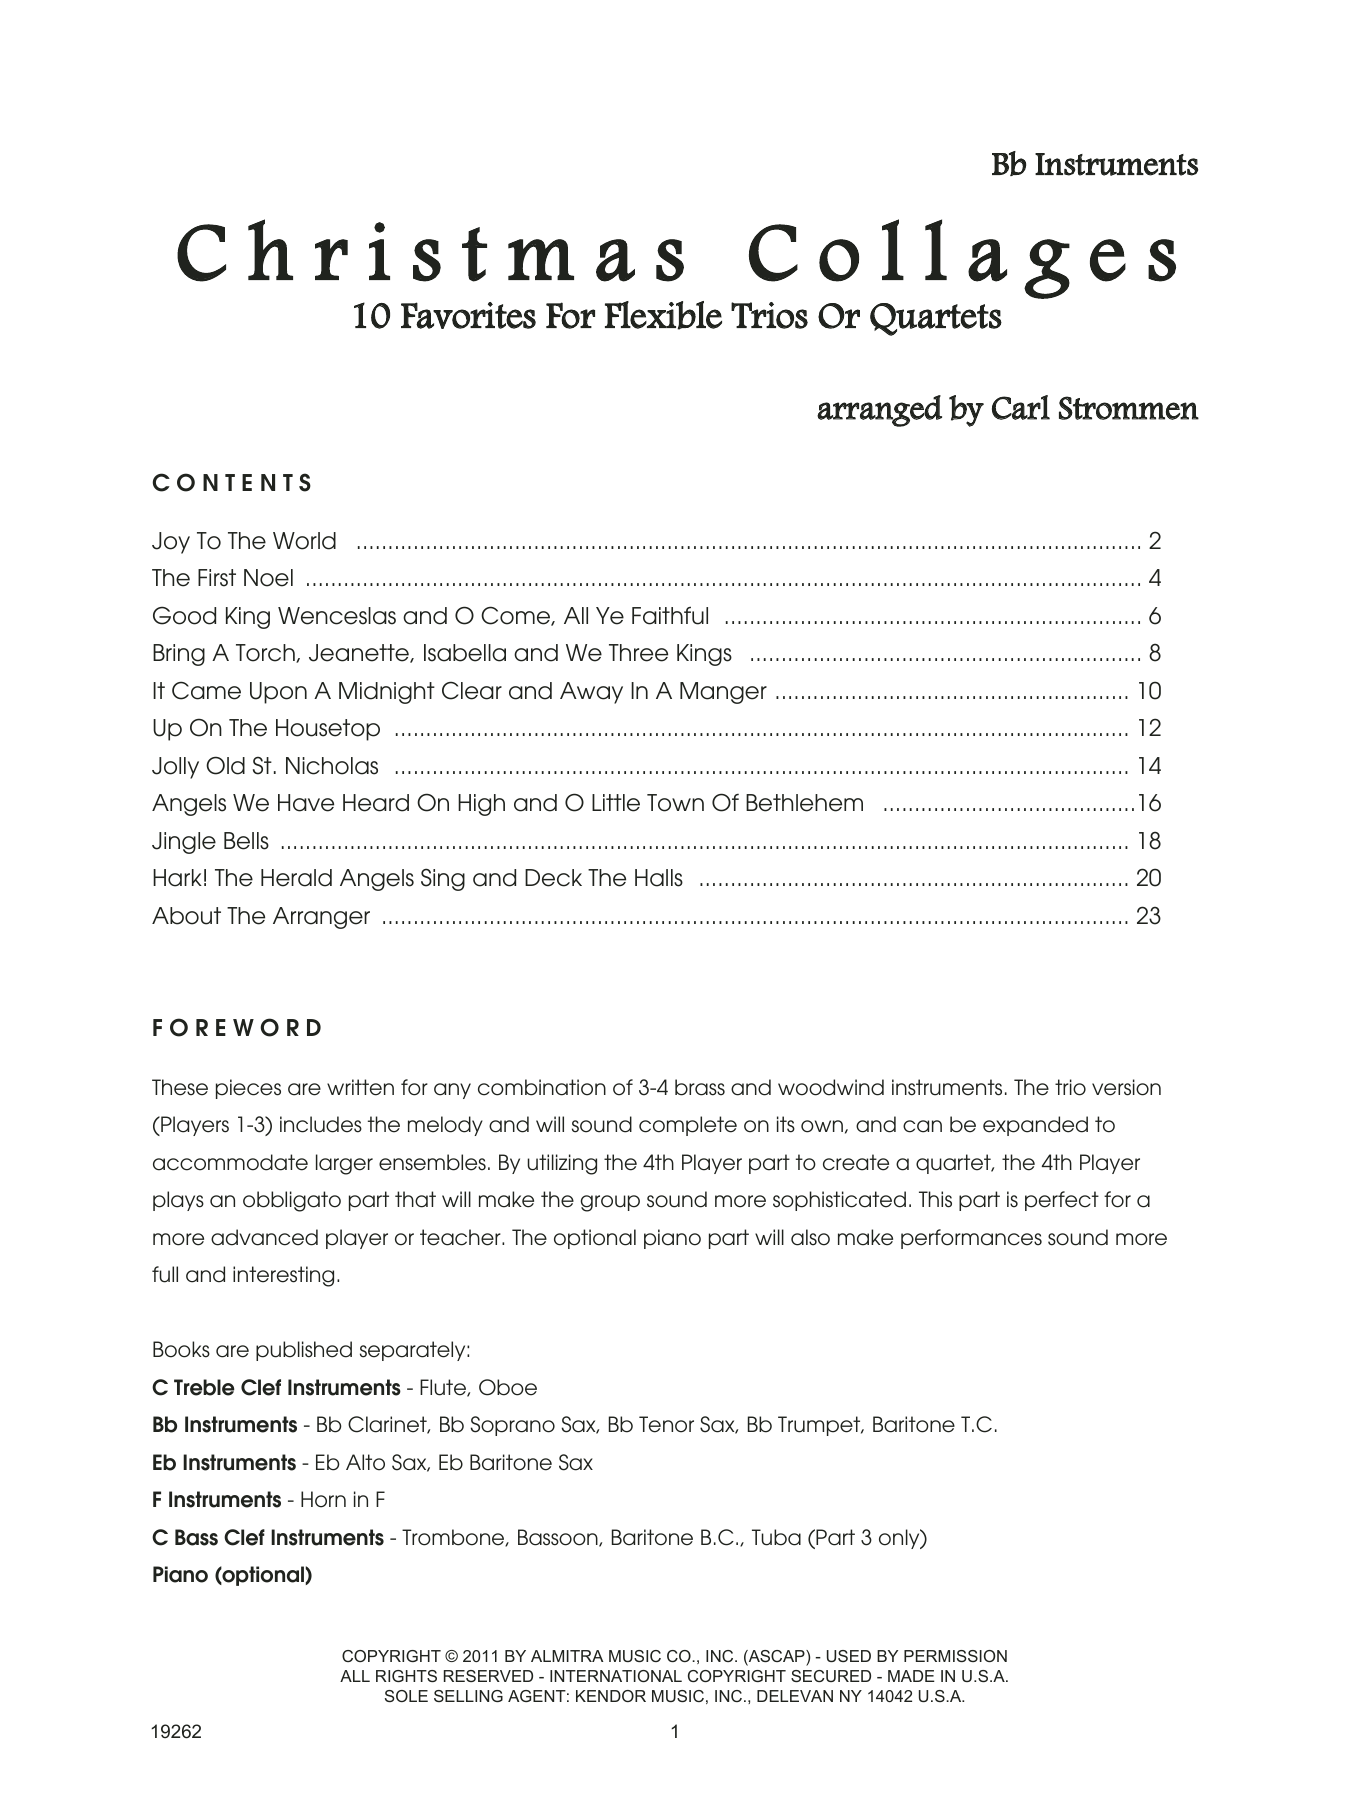 Download Strommen Christmas Collages - Bb Instruments Sheet Music